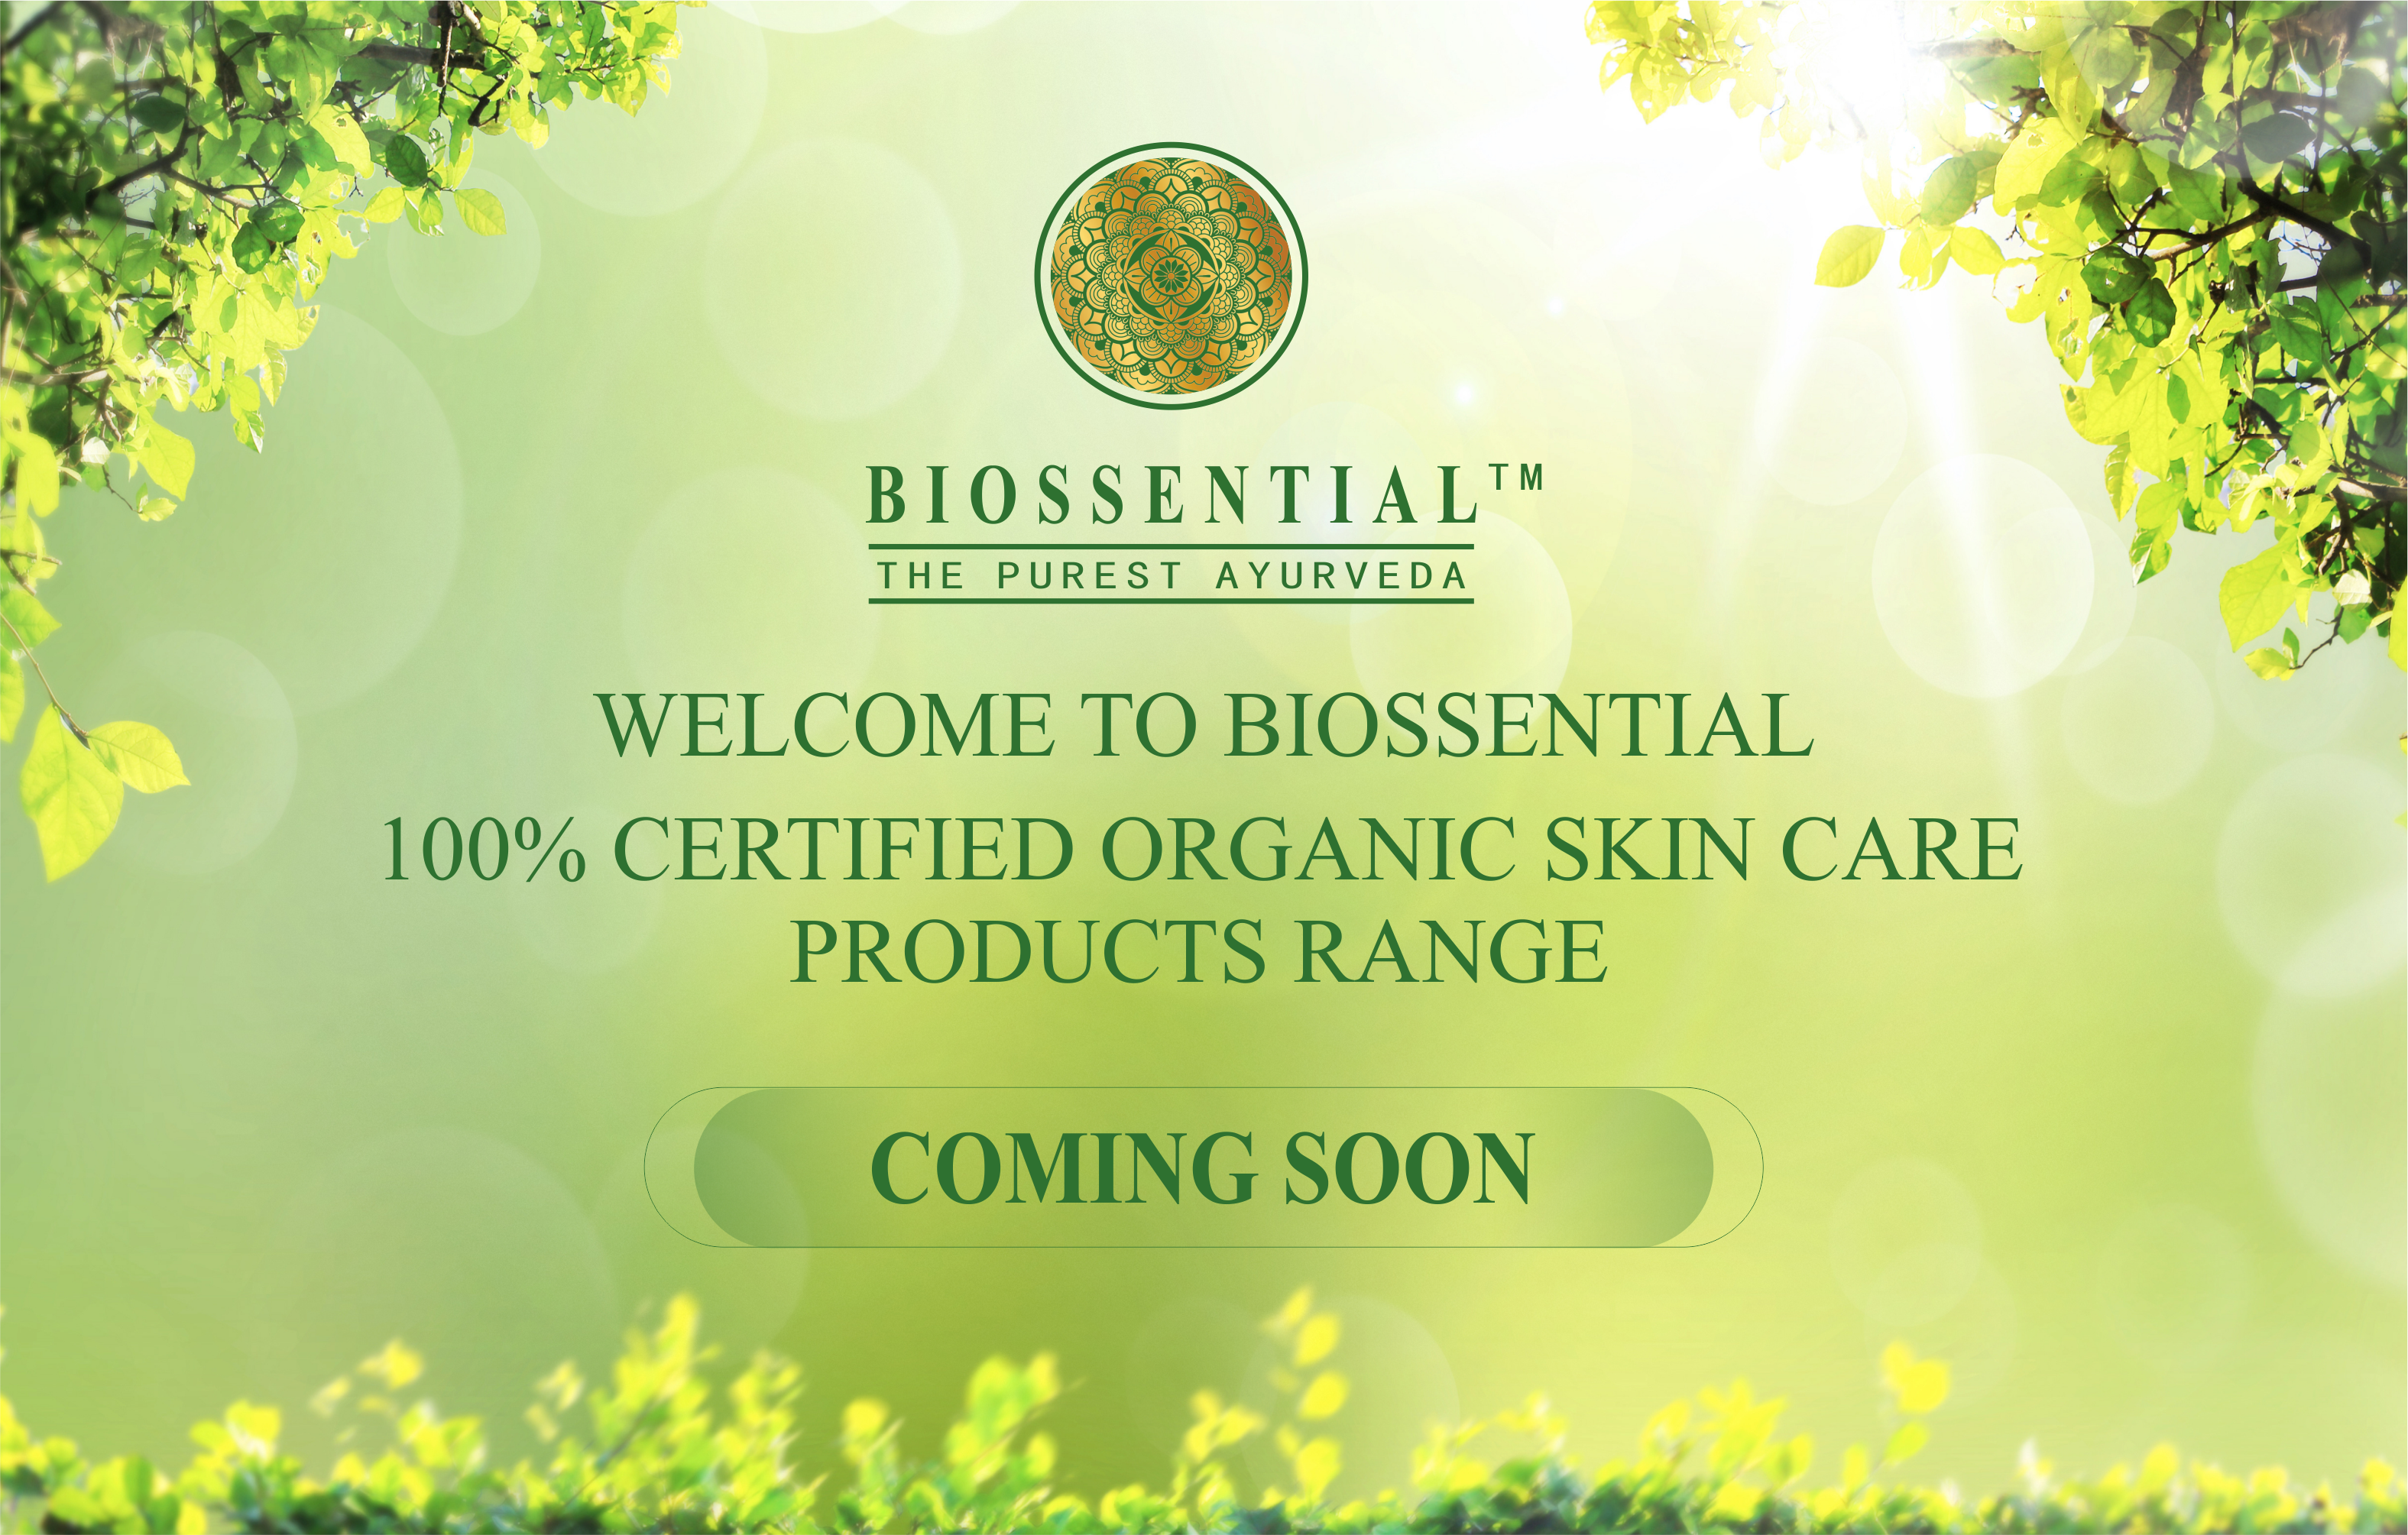 Biossential 100% Certified Organic Skin Care Products